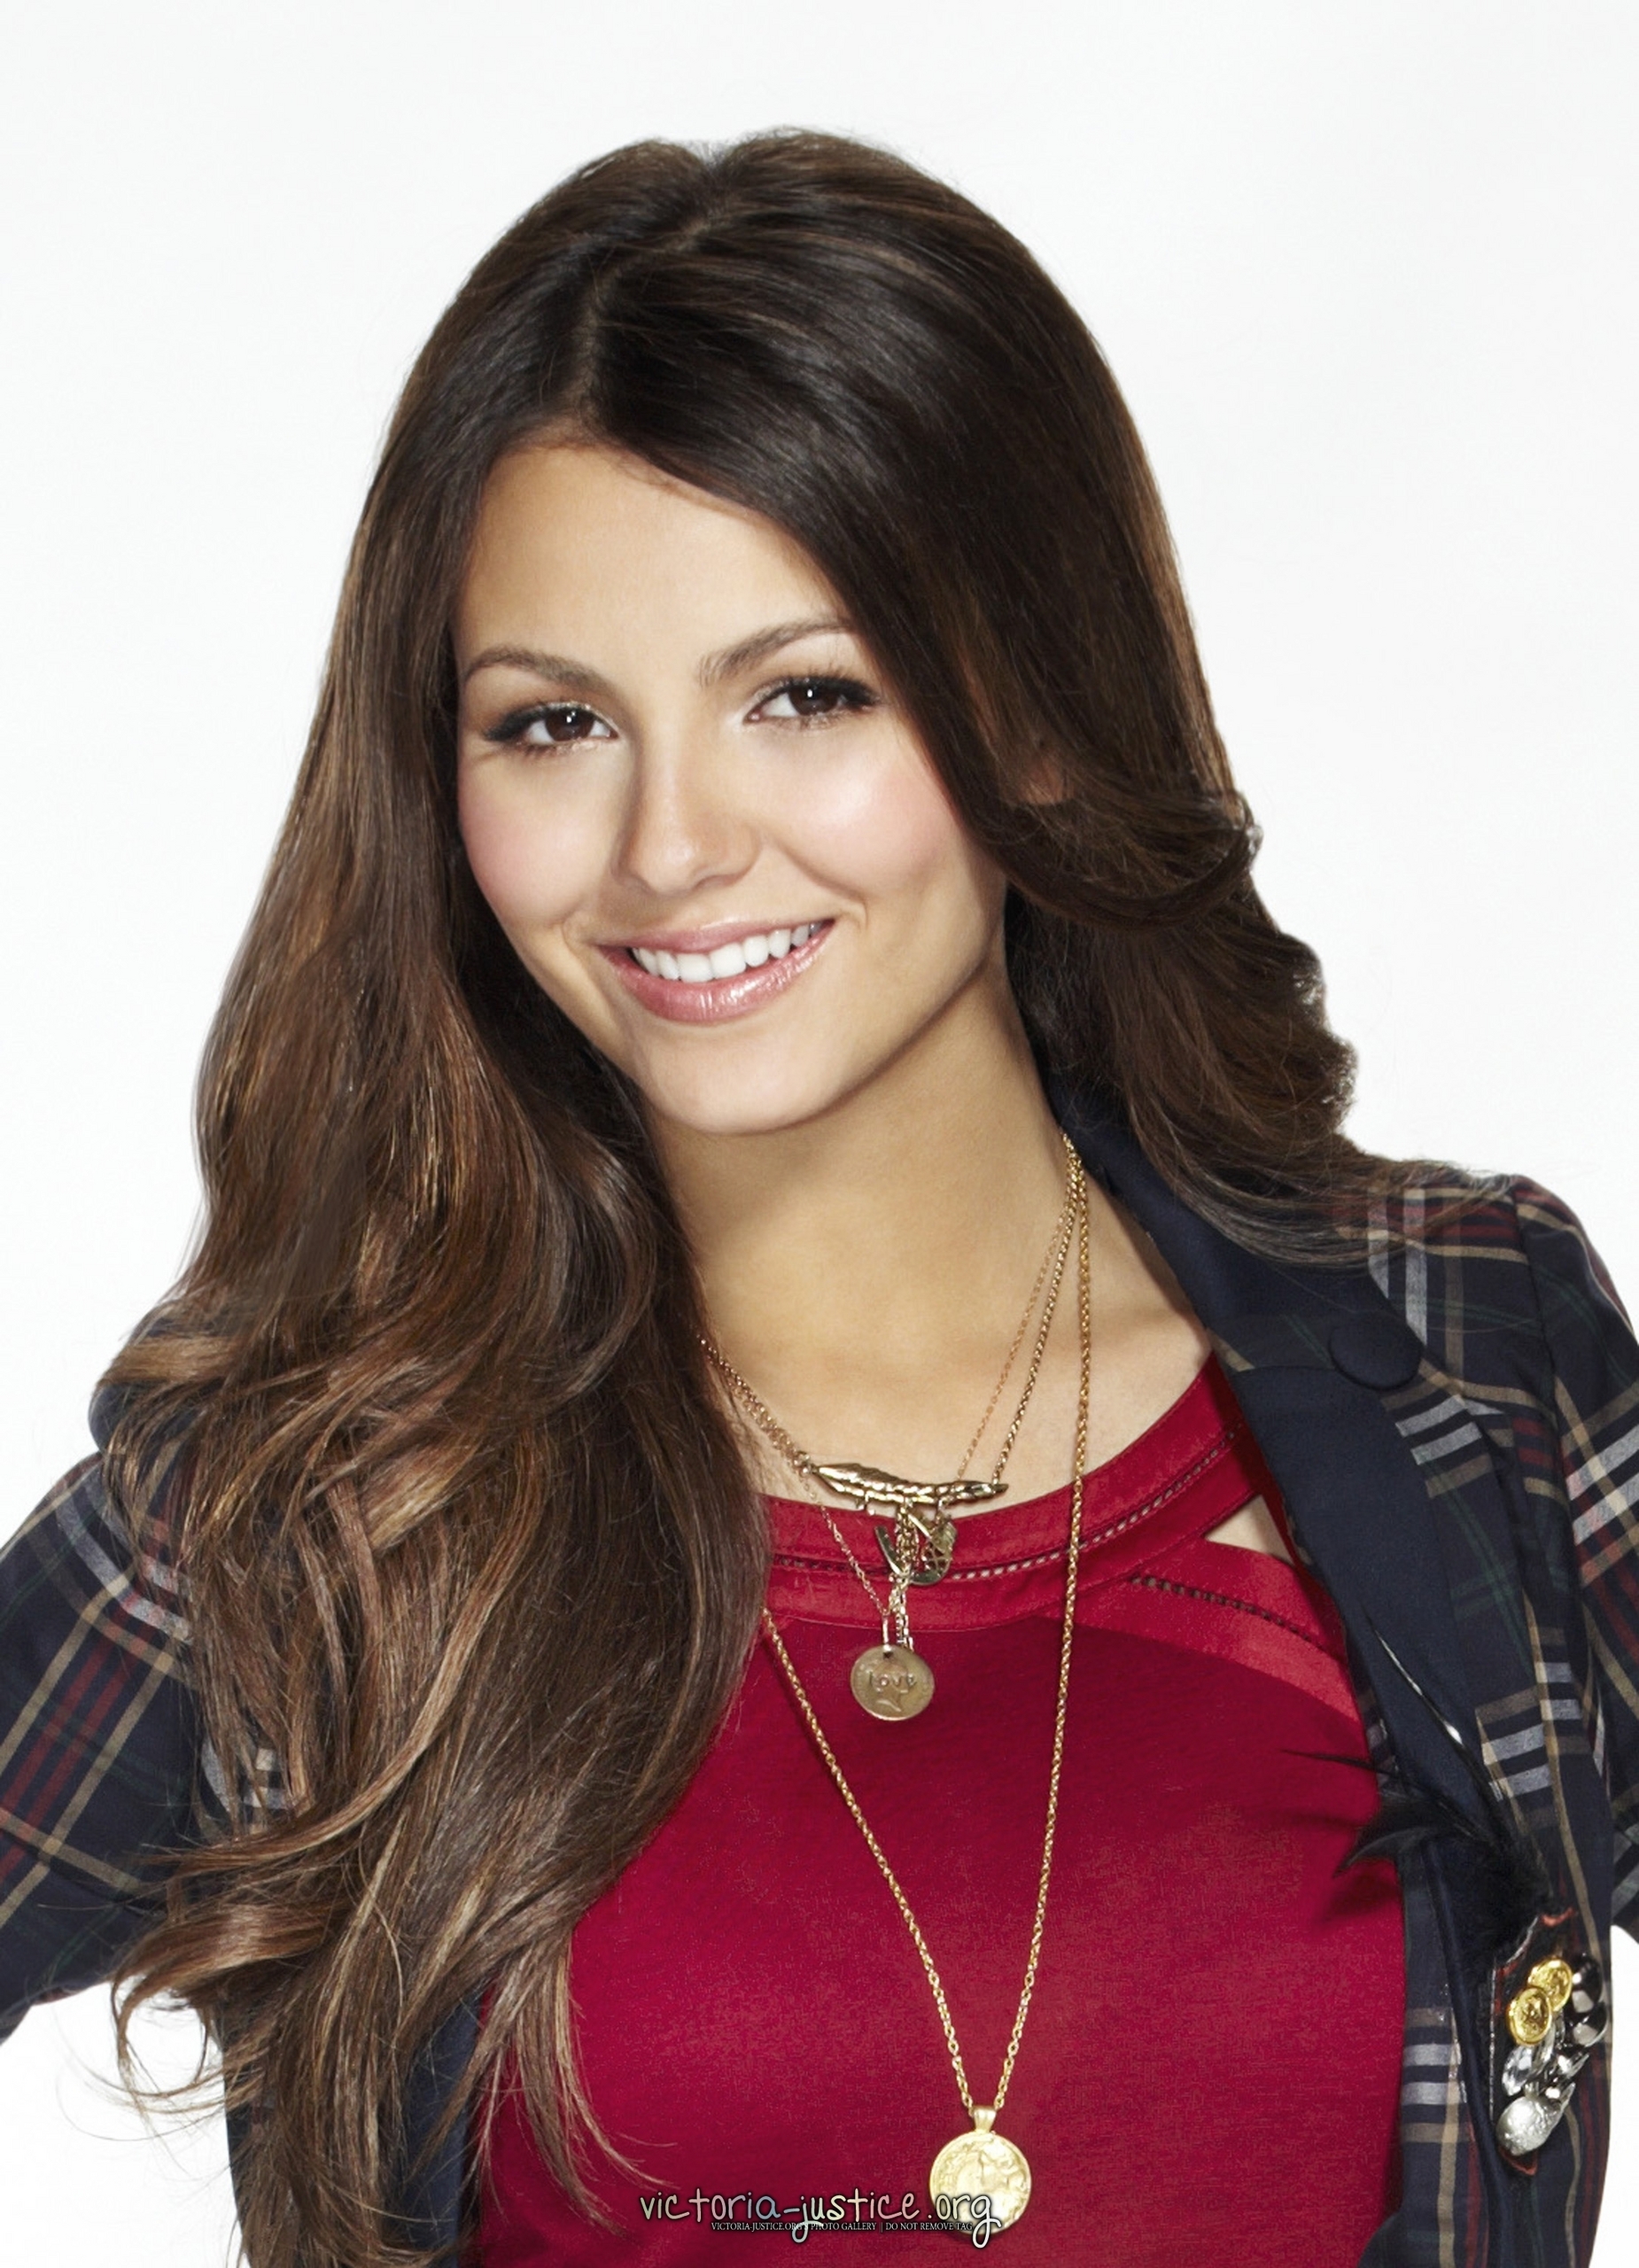 Tori Vega Was The WORST 'Victorious' Character, Change My Mind